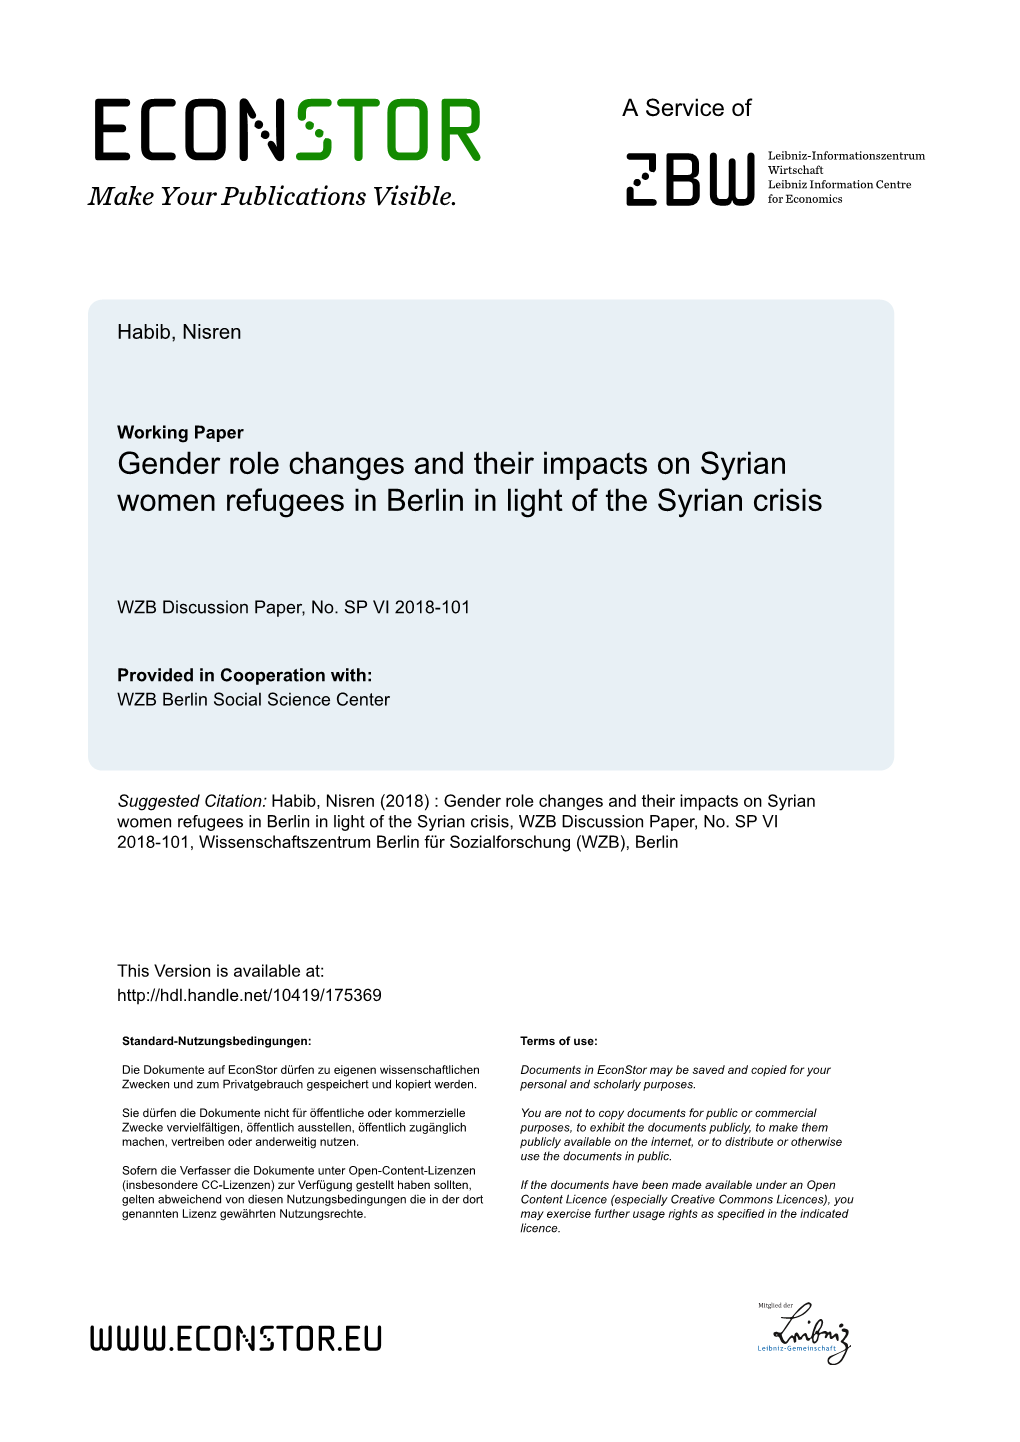 Gender Role Changes and Their Impacts on Syrian Women Refugees in Berlin in Light of the Syrian Crisis